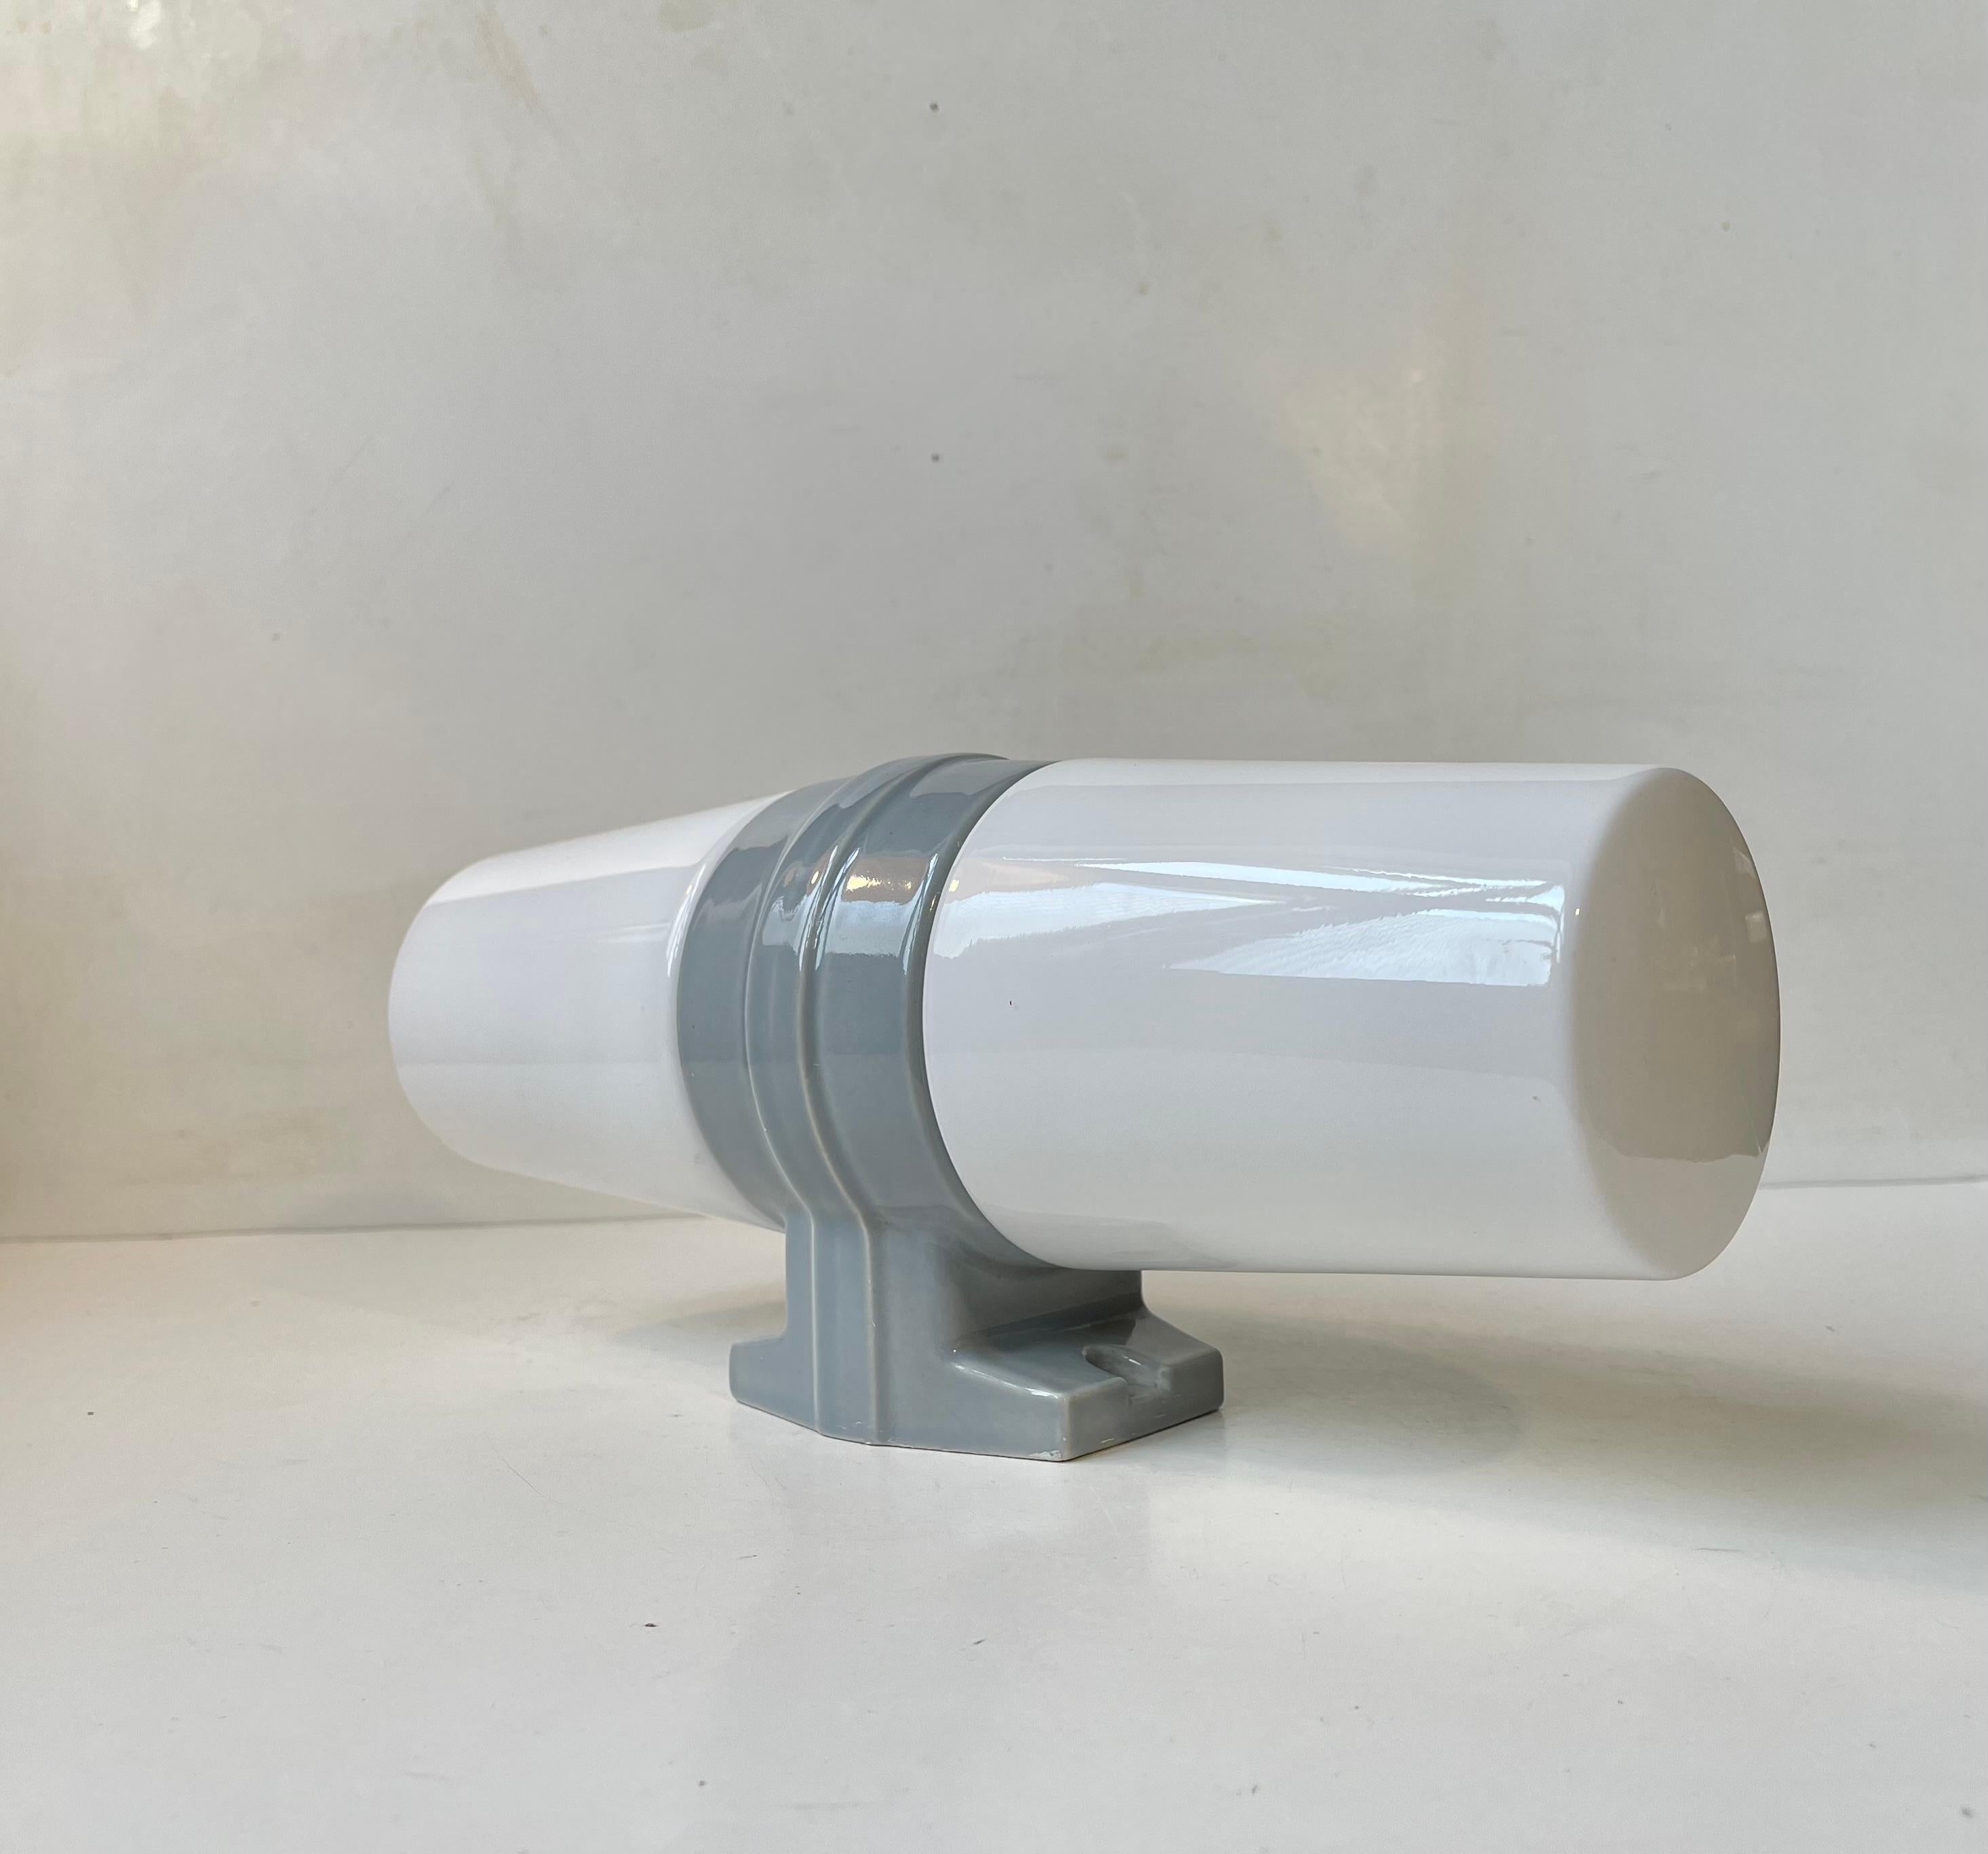 Grey Scandinavian Dual Bathroom Wall Lamp by Sigvard Bernadotte for Ifö, 1960s In Good Condition For Sale In Esbjerg, DK